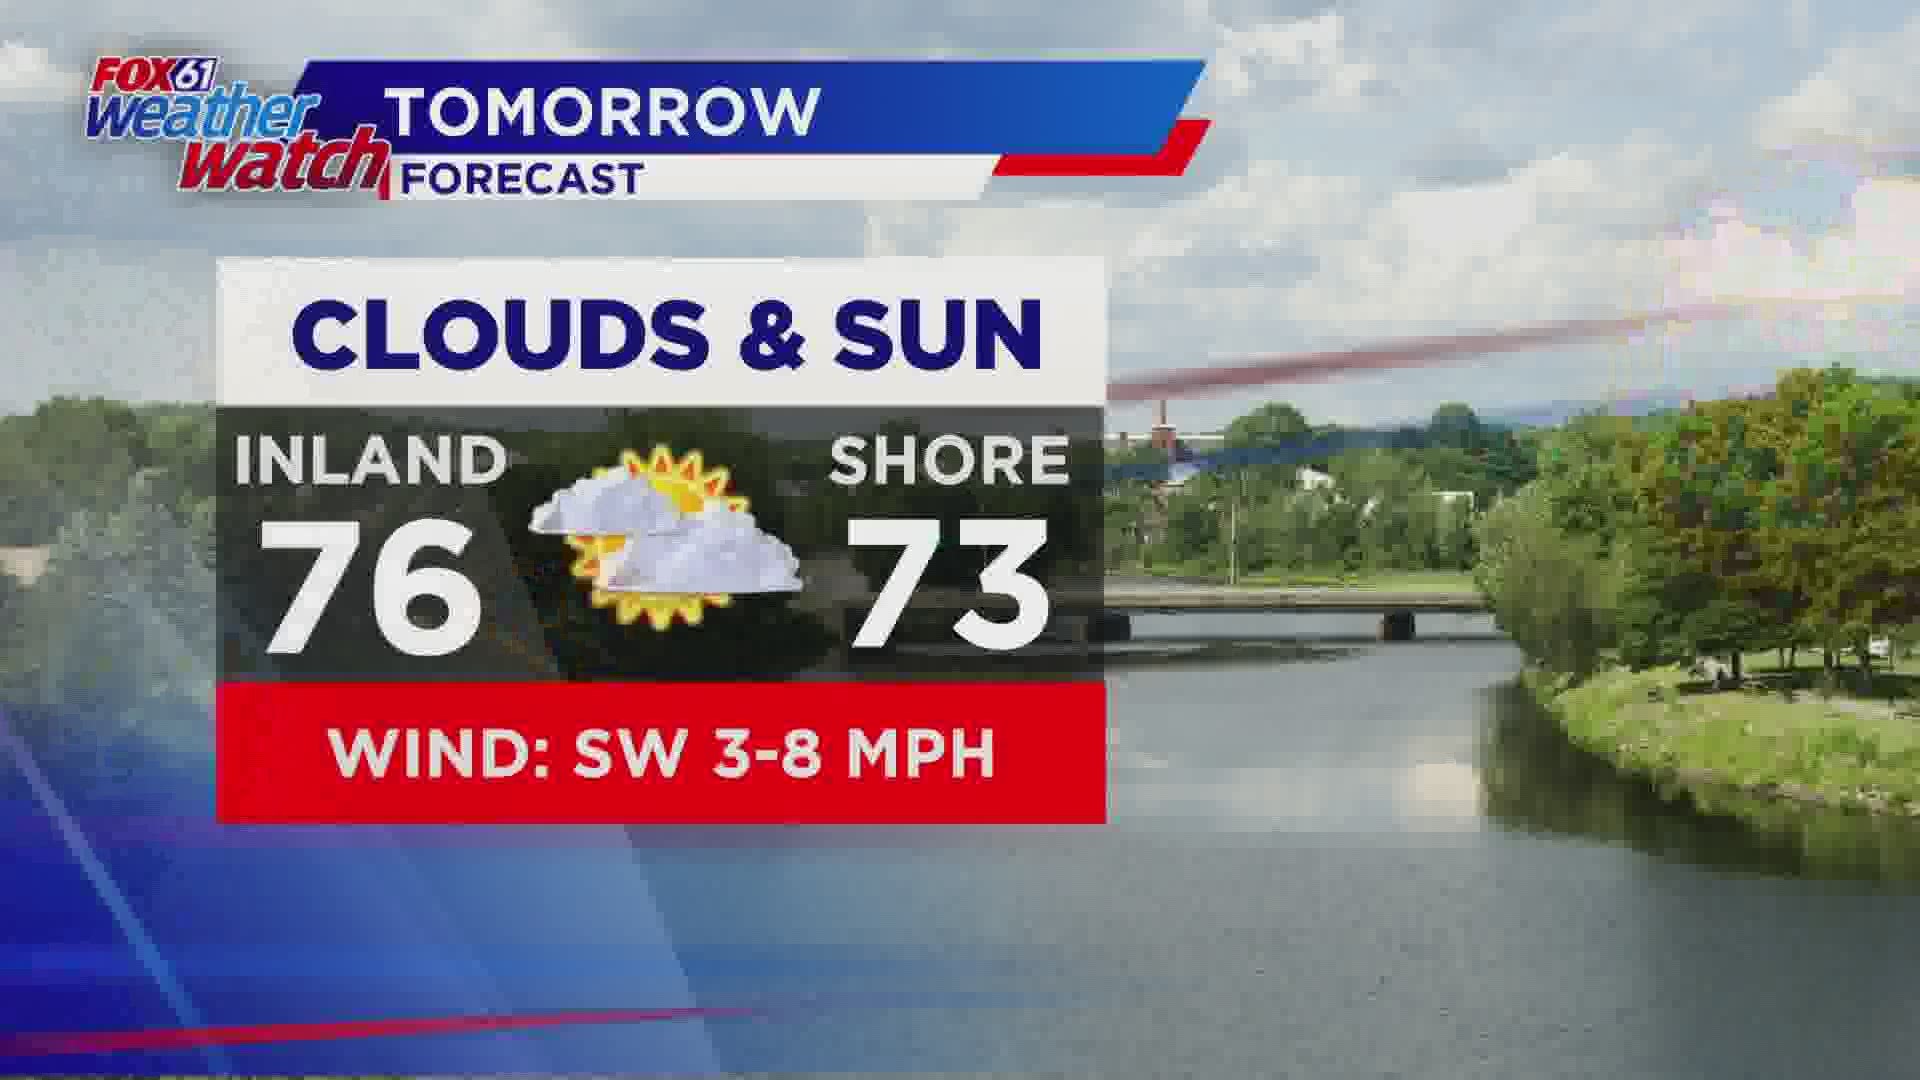 Mix of clouds and sun for Tuesday